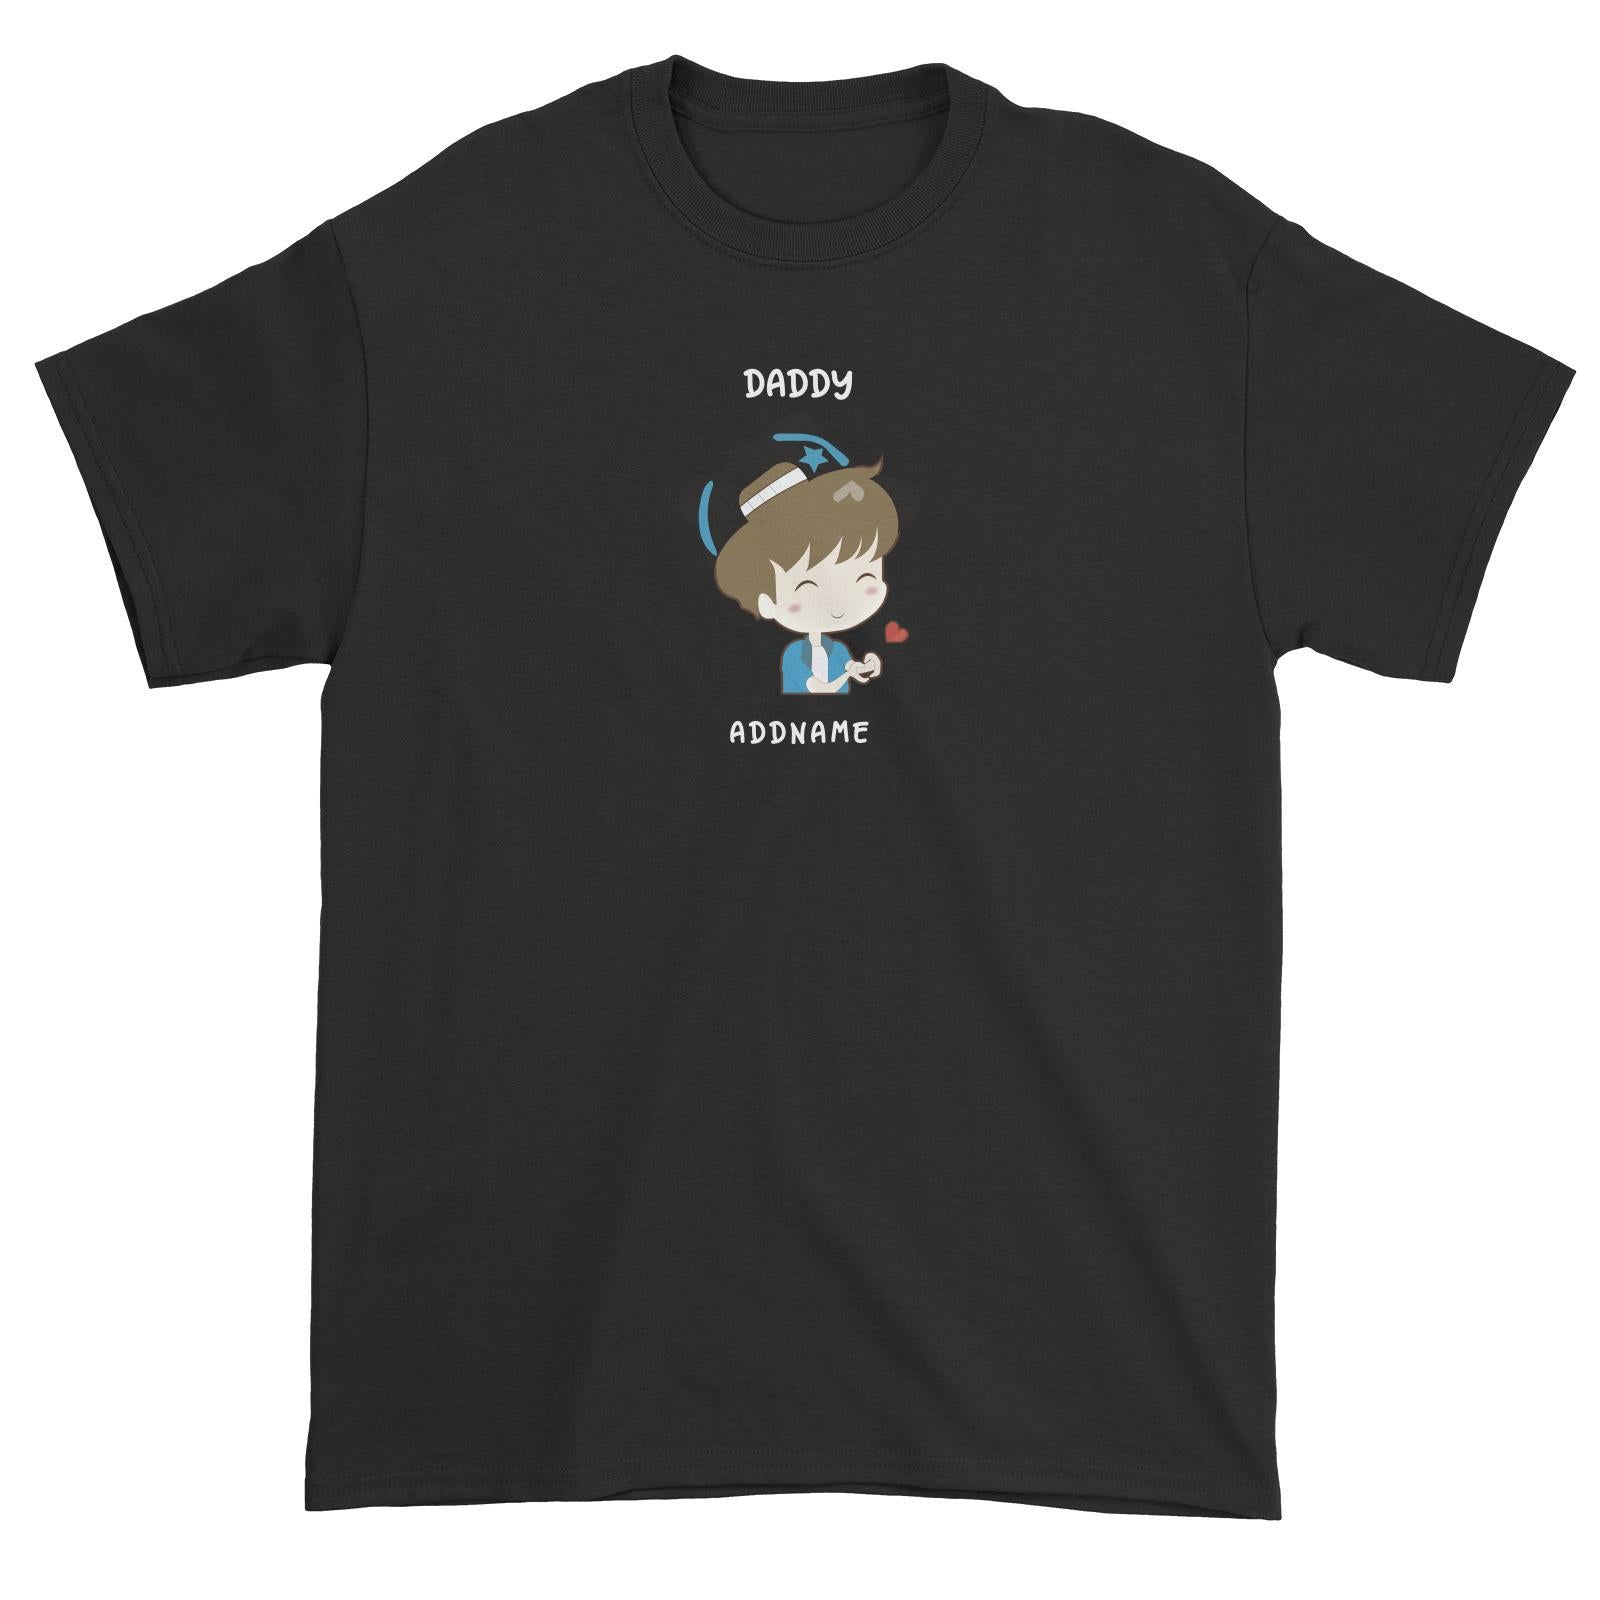 My Lovely Family Series Daddy Addname Unisex T-Shirt